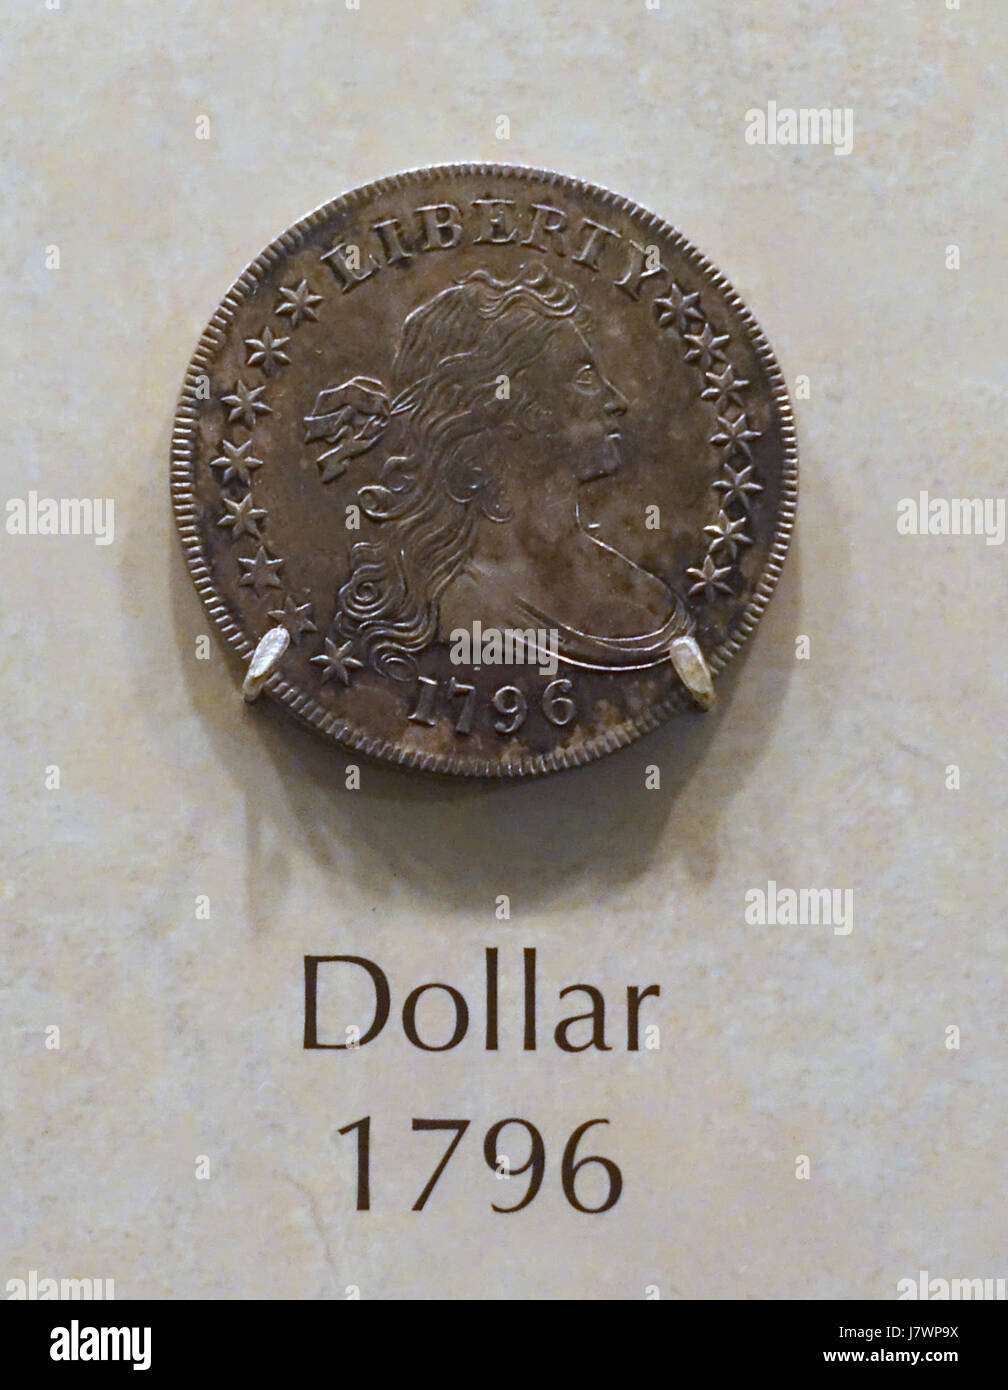 1 Dollar, United States, 1796   National Museum of American History   DSC00254 Stock Photo